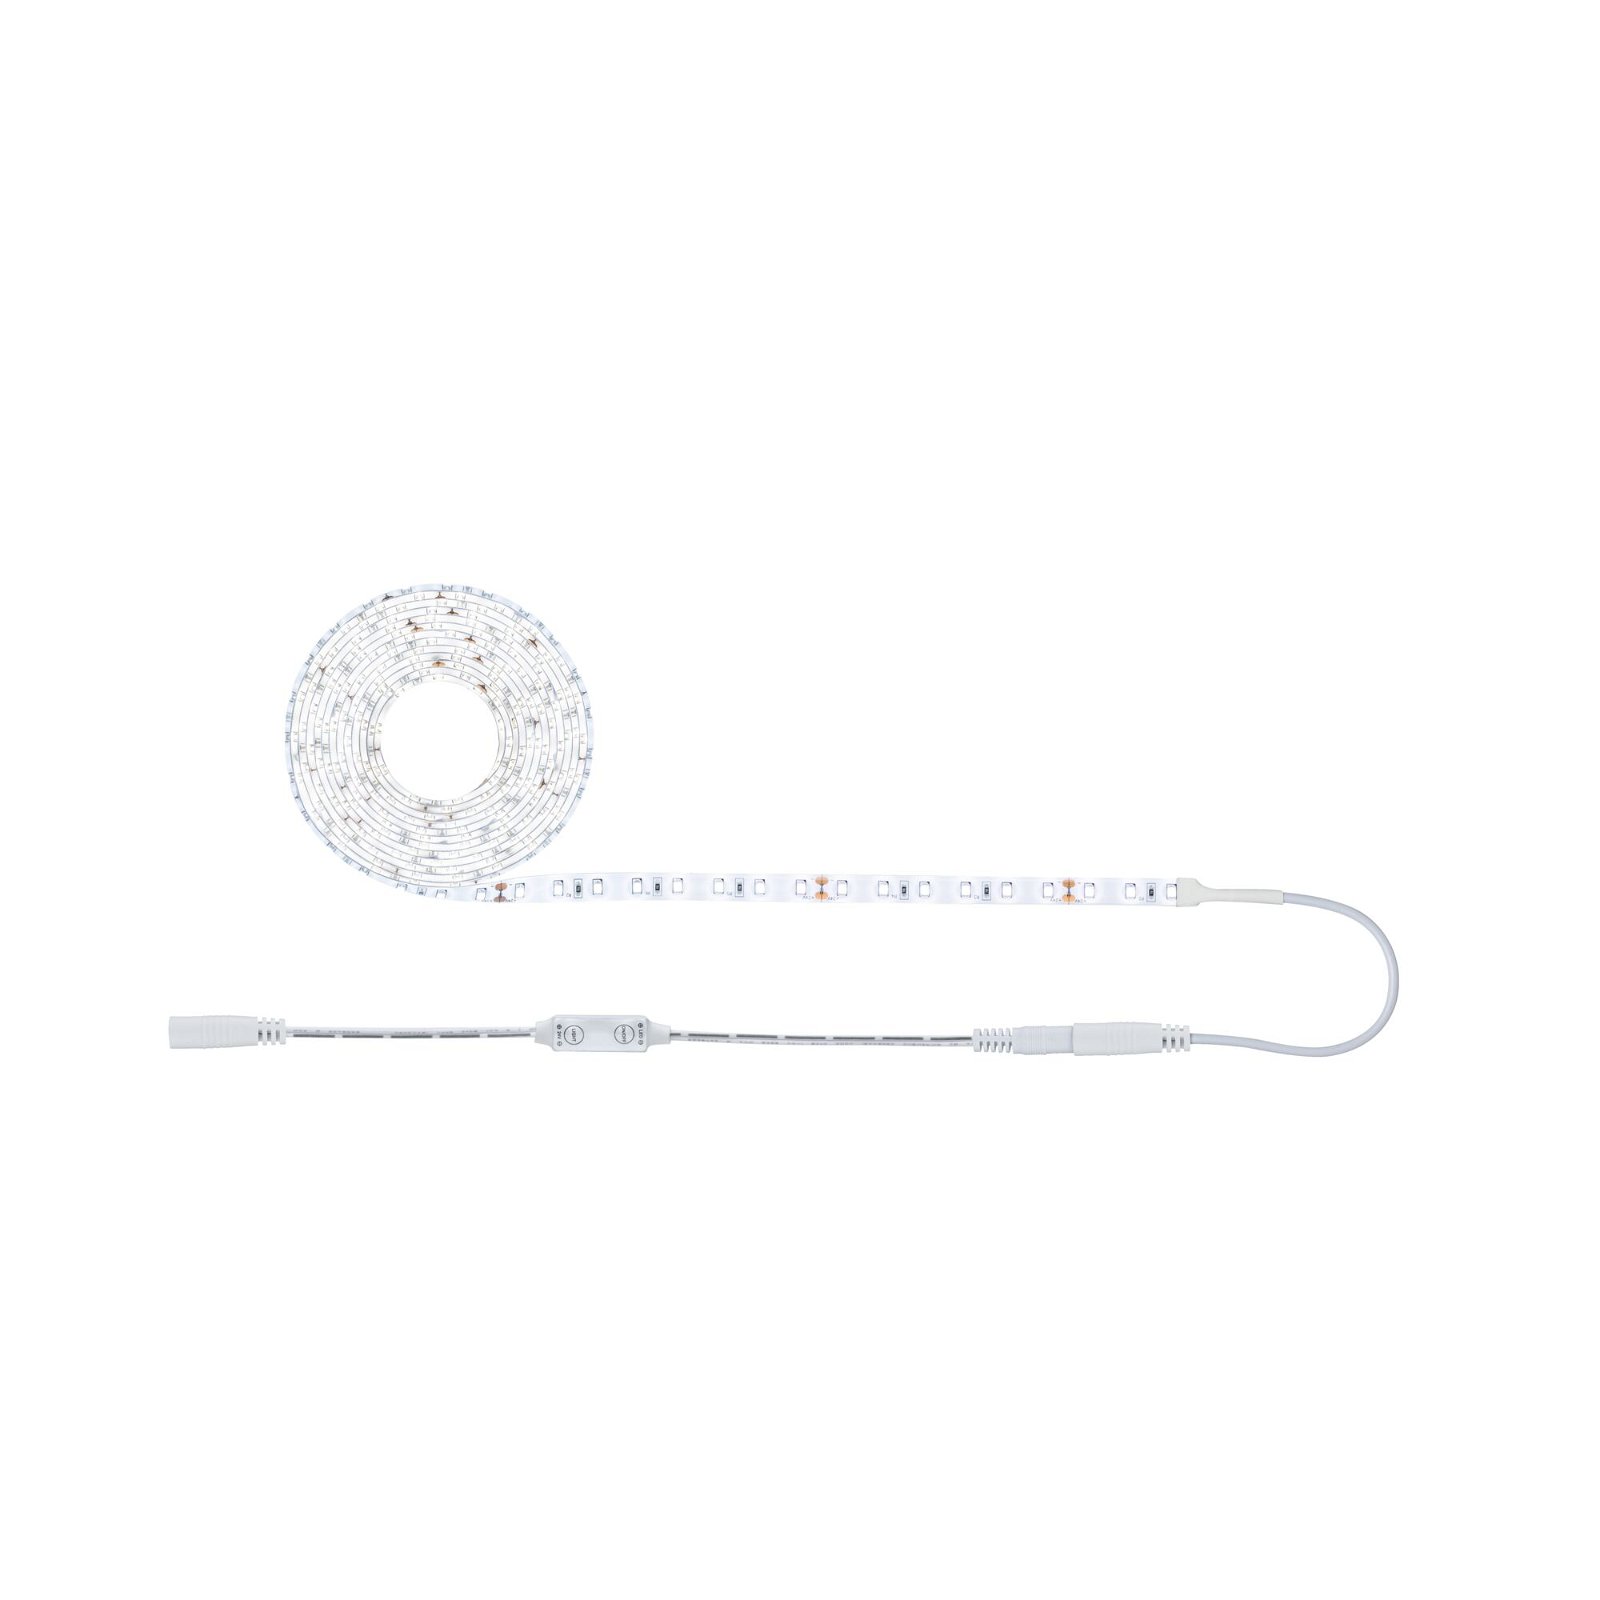 SimpLED Power LED cover Strip 33W Complete Dimm/Switch Neutral set incl. 1060lm/ white protect 3m